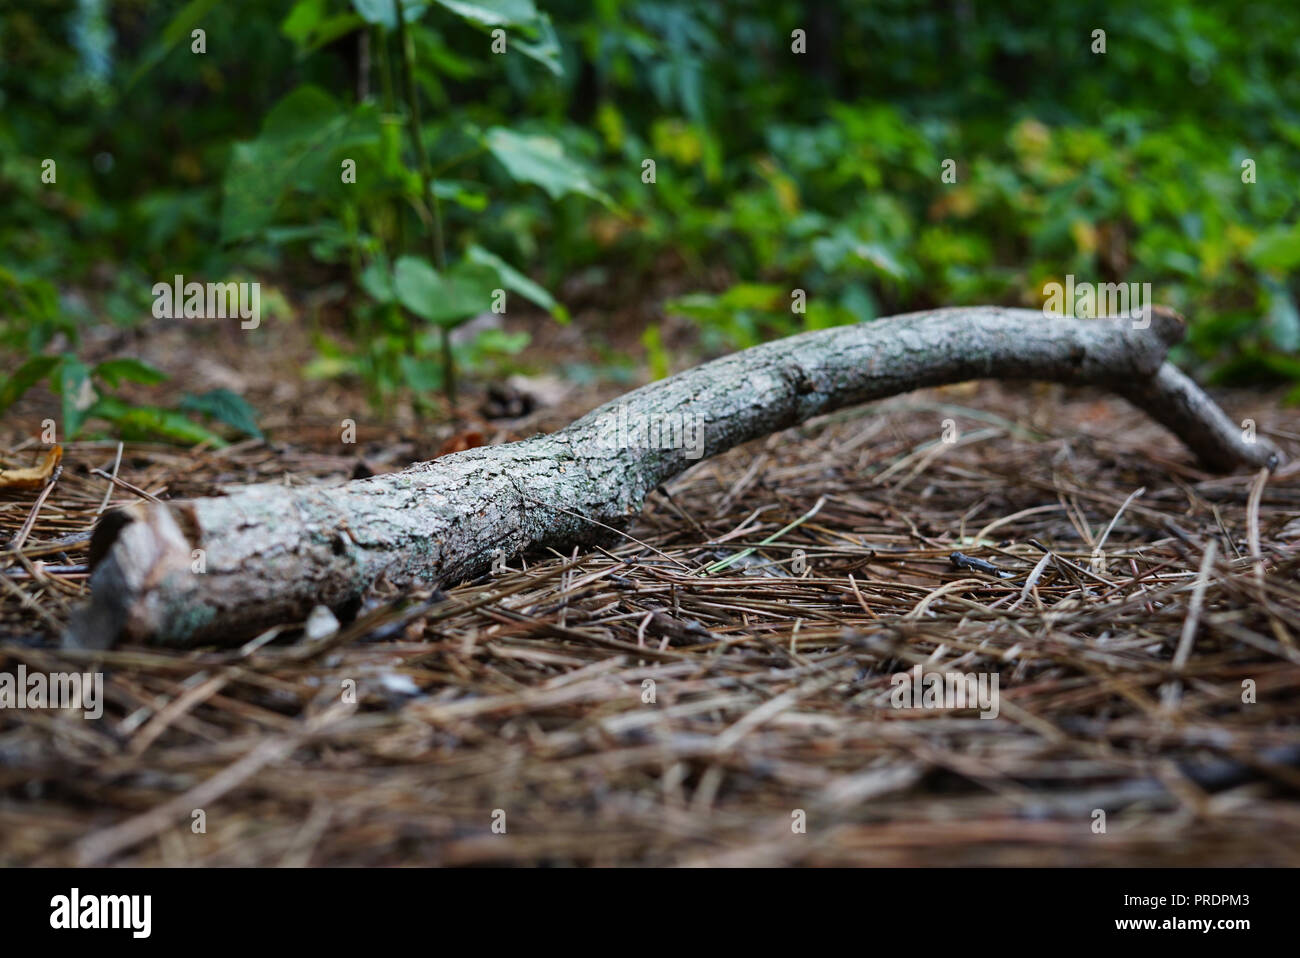 A dry twig lies on Natural spruce forest ground with some leaves and needles. A young tree grows behind a branch. The earth is covered with ivy. Spruc Stock Photo